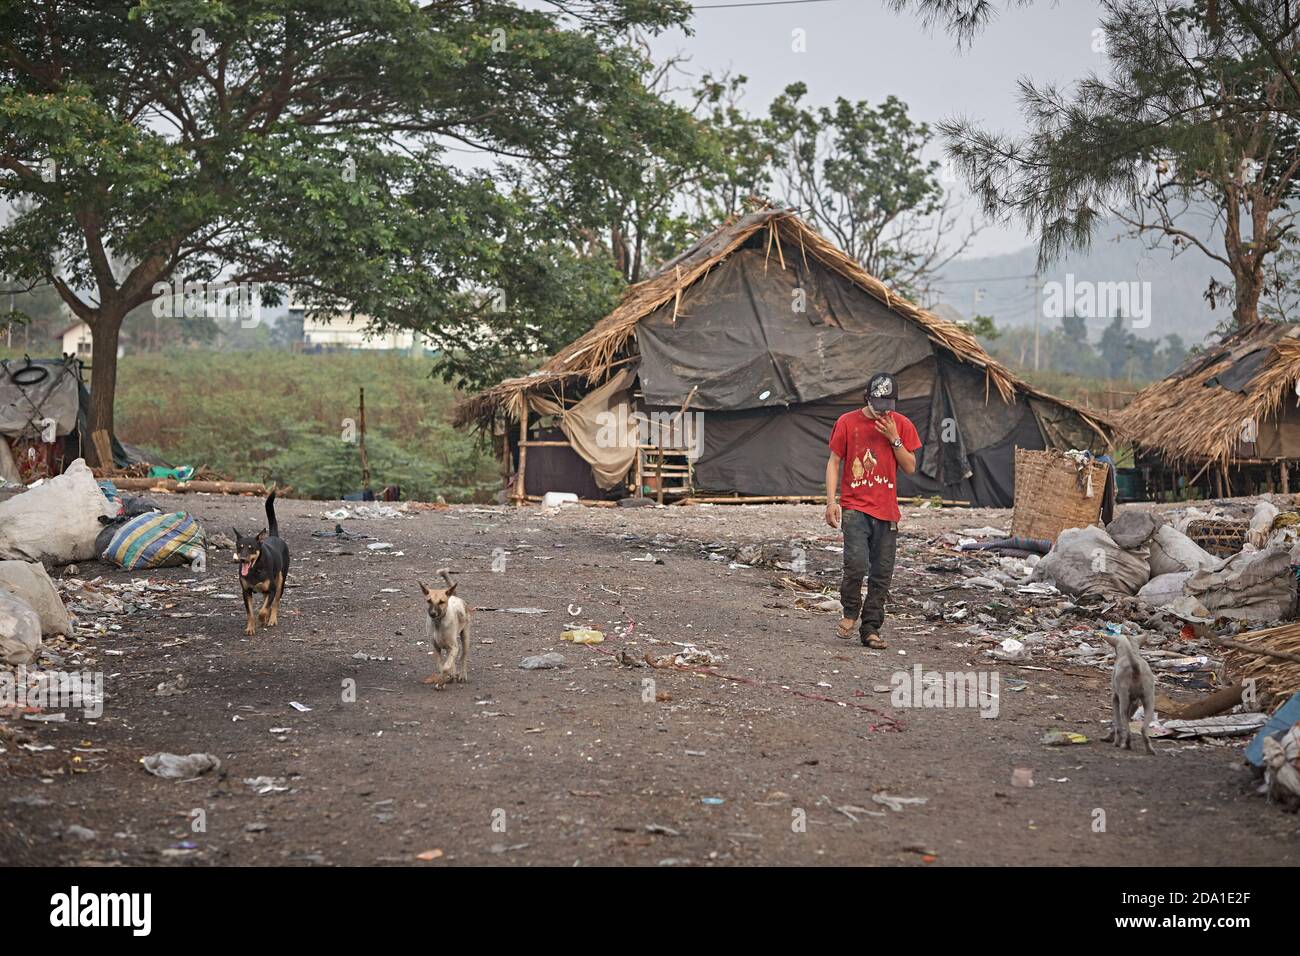 Mae Sot, Thailand. April 2012. Garbage dump on the outskirts of the city where Myanmar refugees live. Stock Photo